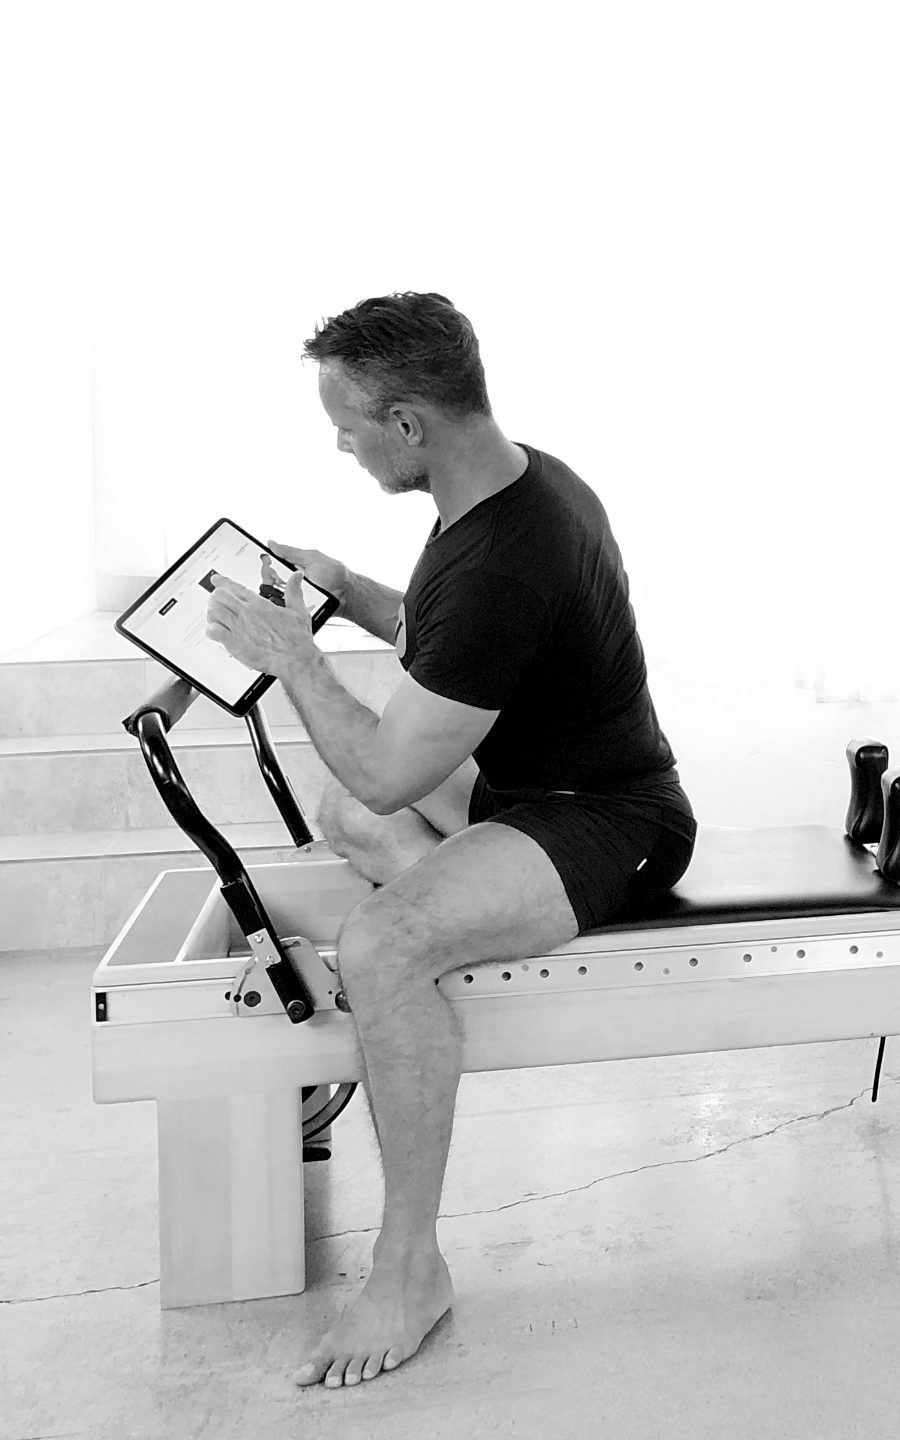 Sean on a pilates machine reading something on a tablet